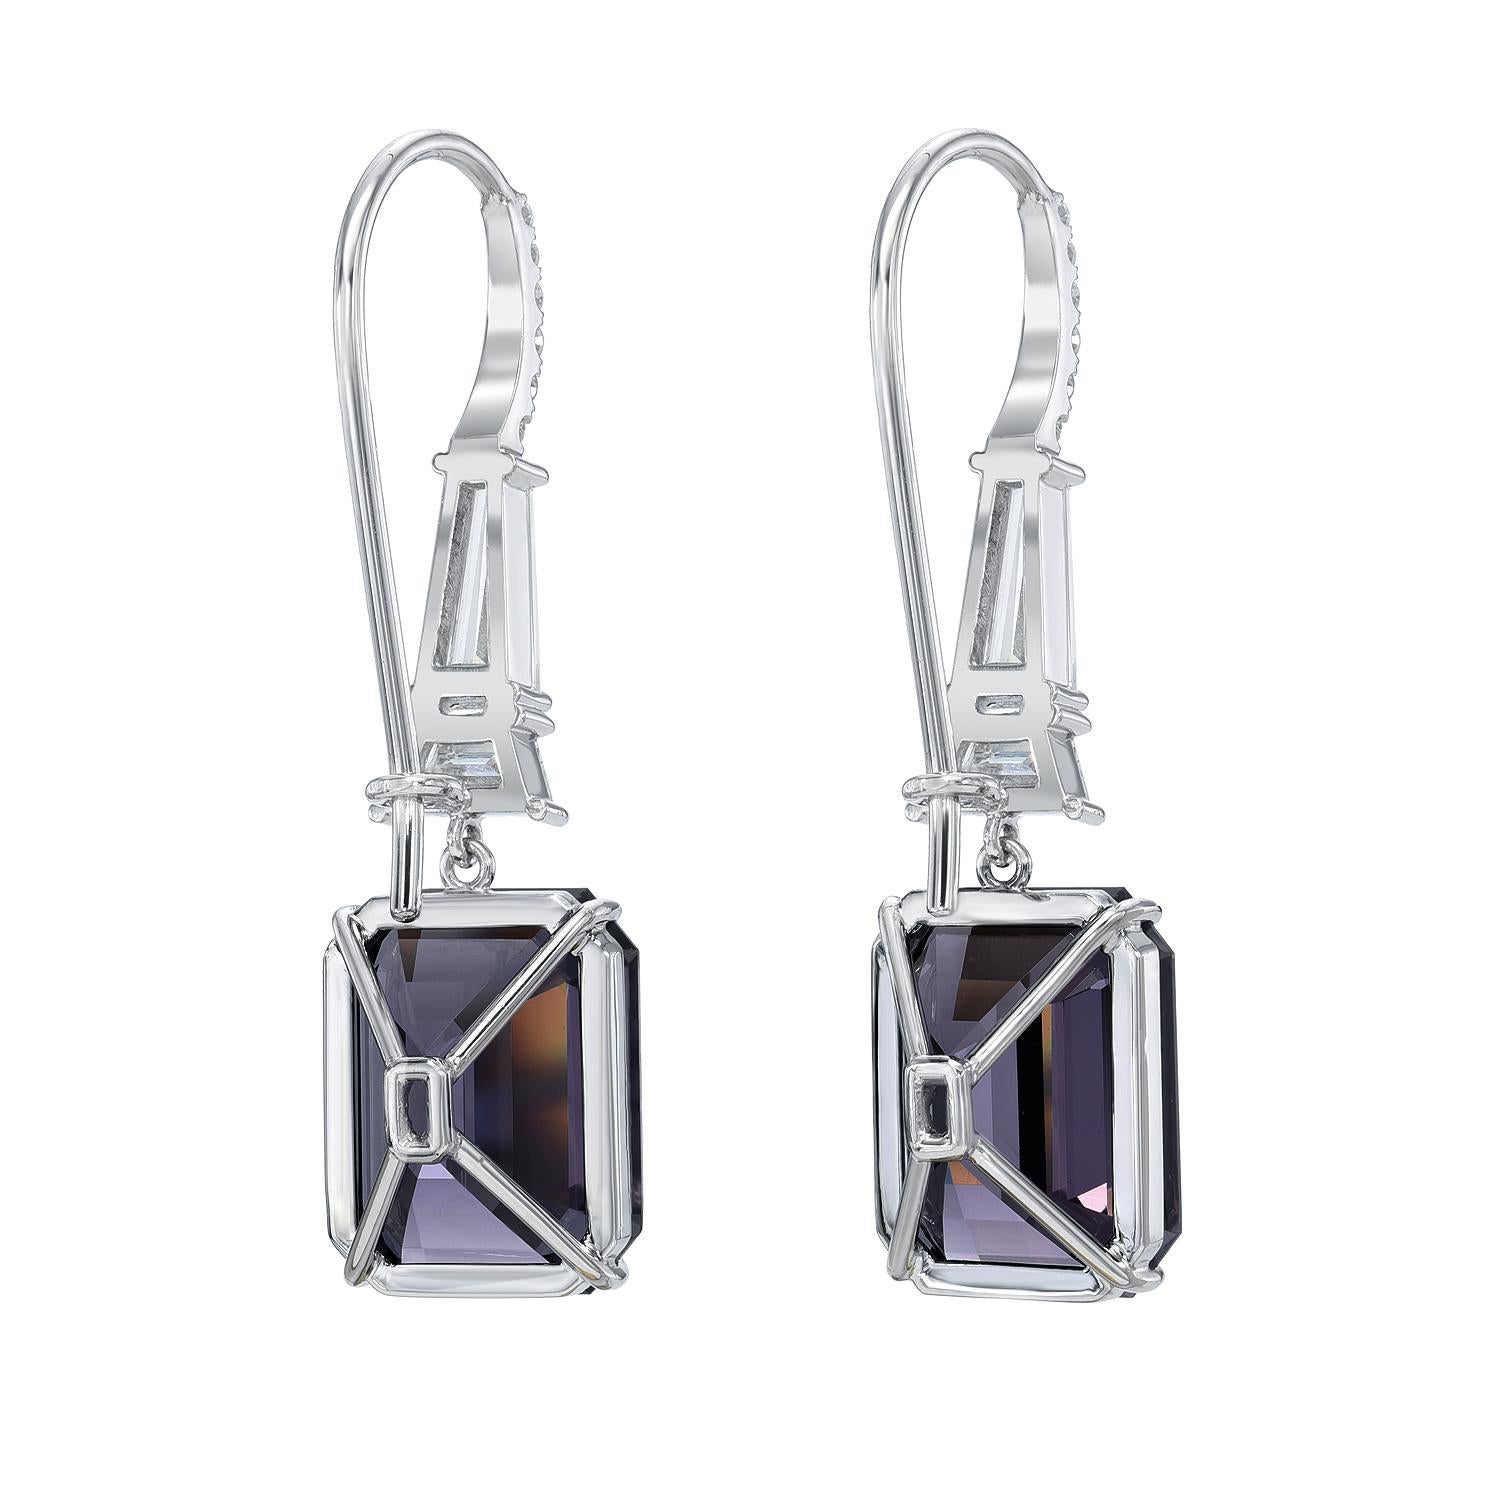 Ultra exclusive 13.12 carat, bright, Grey-Violet Spinel, emerald-cut earrings, decorated with a total of 0.65 carat E-F/VVS1 tapered baguette diamonds, a pair of 0.37 carat E/VS1 trapezoid diamonds, and a total of 0.15 carat round brilliant